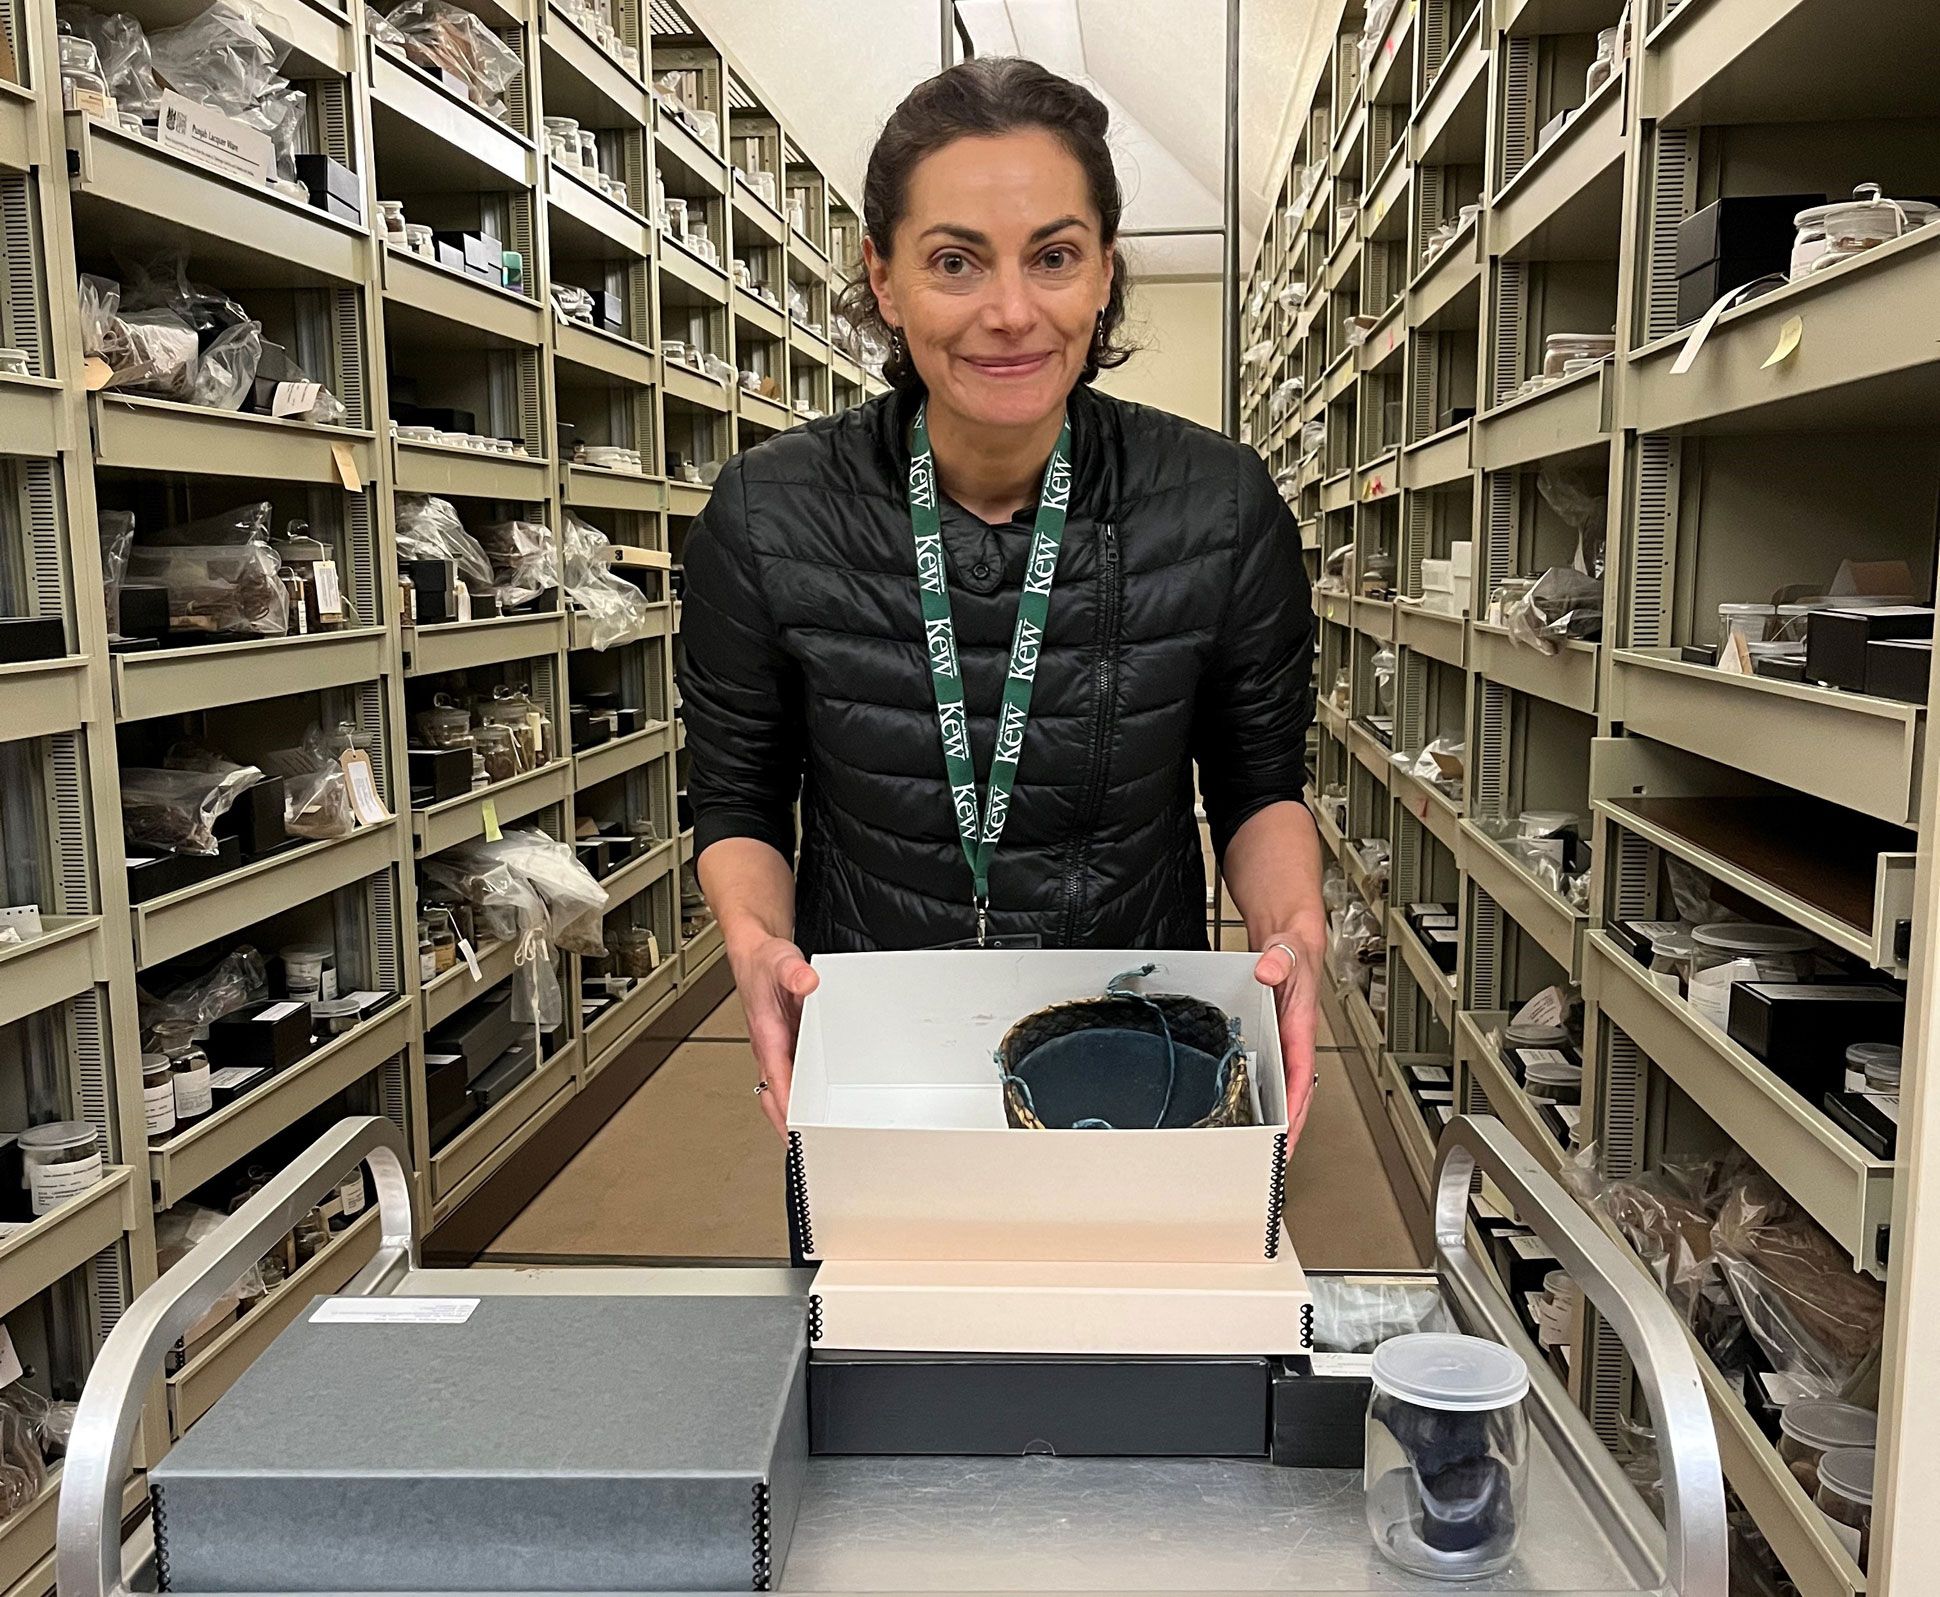 Vivi Mellegard in Kew's Economic Botany Collection. Long shelves are either side. Vivi is stood in front of a trolley holding a white box that holds a black round bow-like object